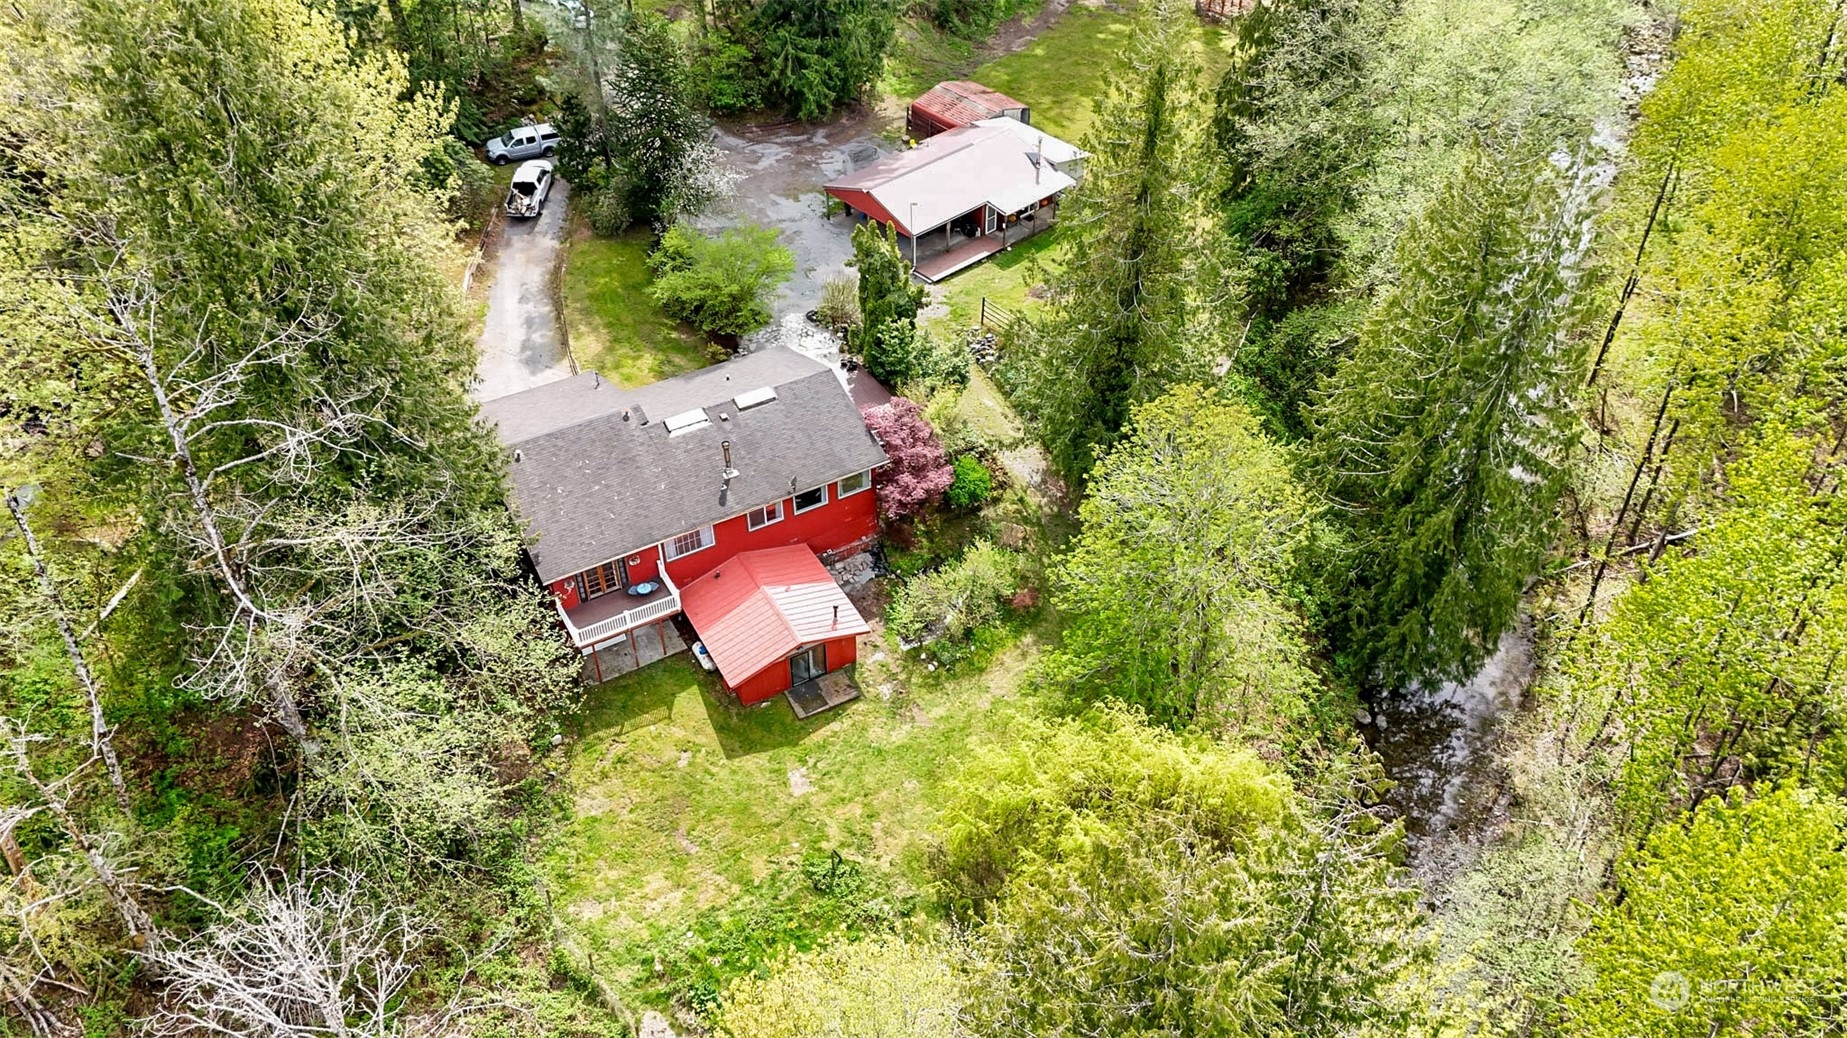 an aerial view of a house with a yard and swimming pool